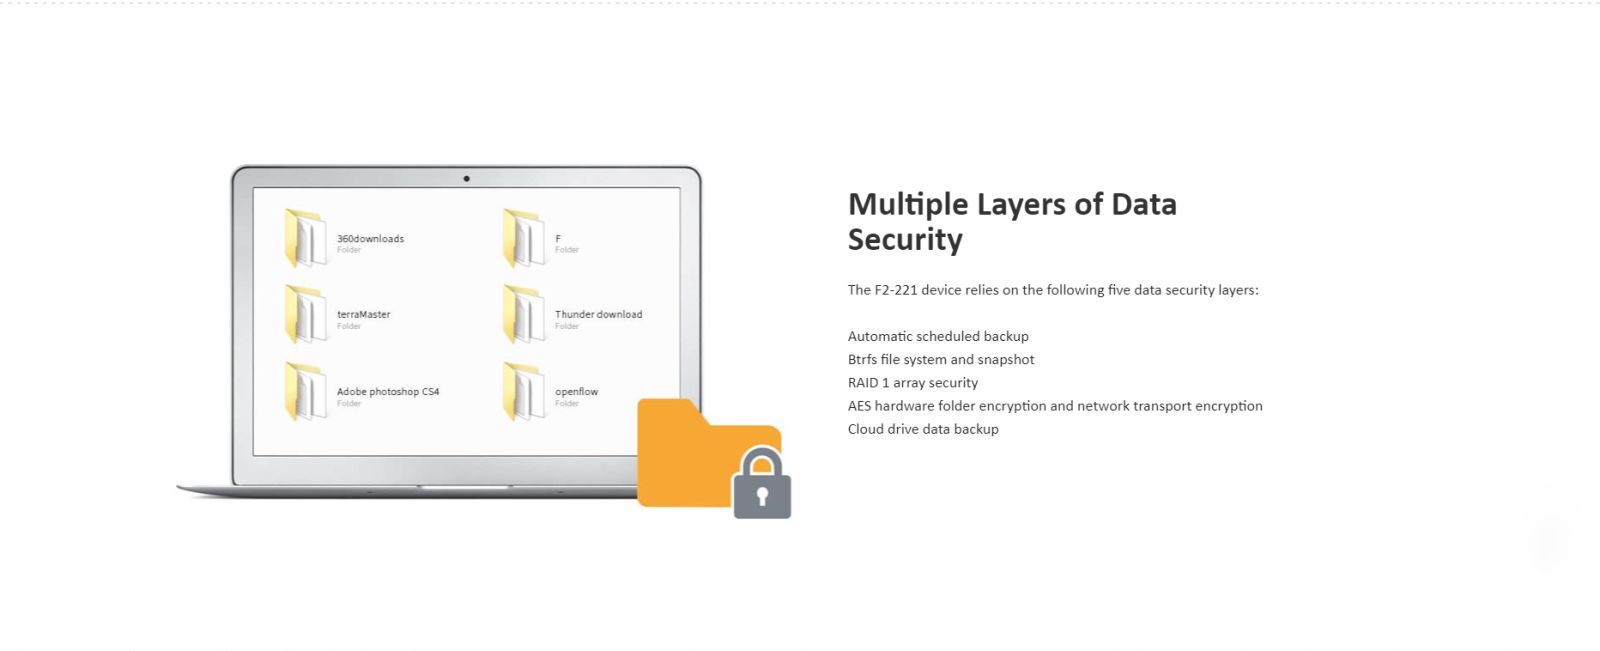 Multiple Layers of Data Security